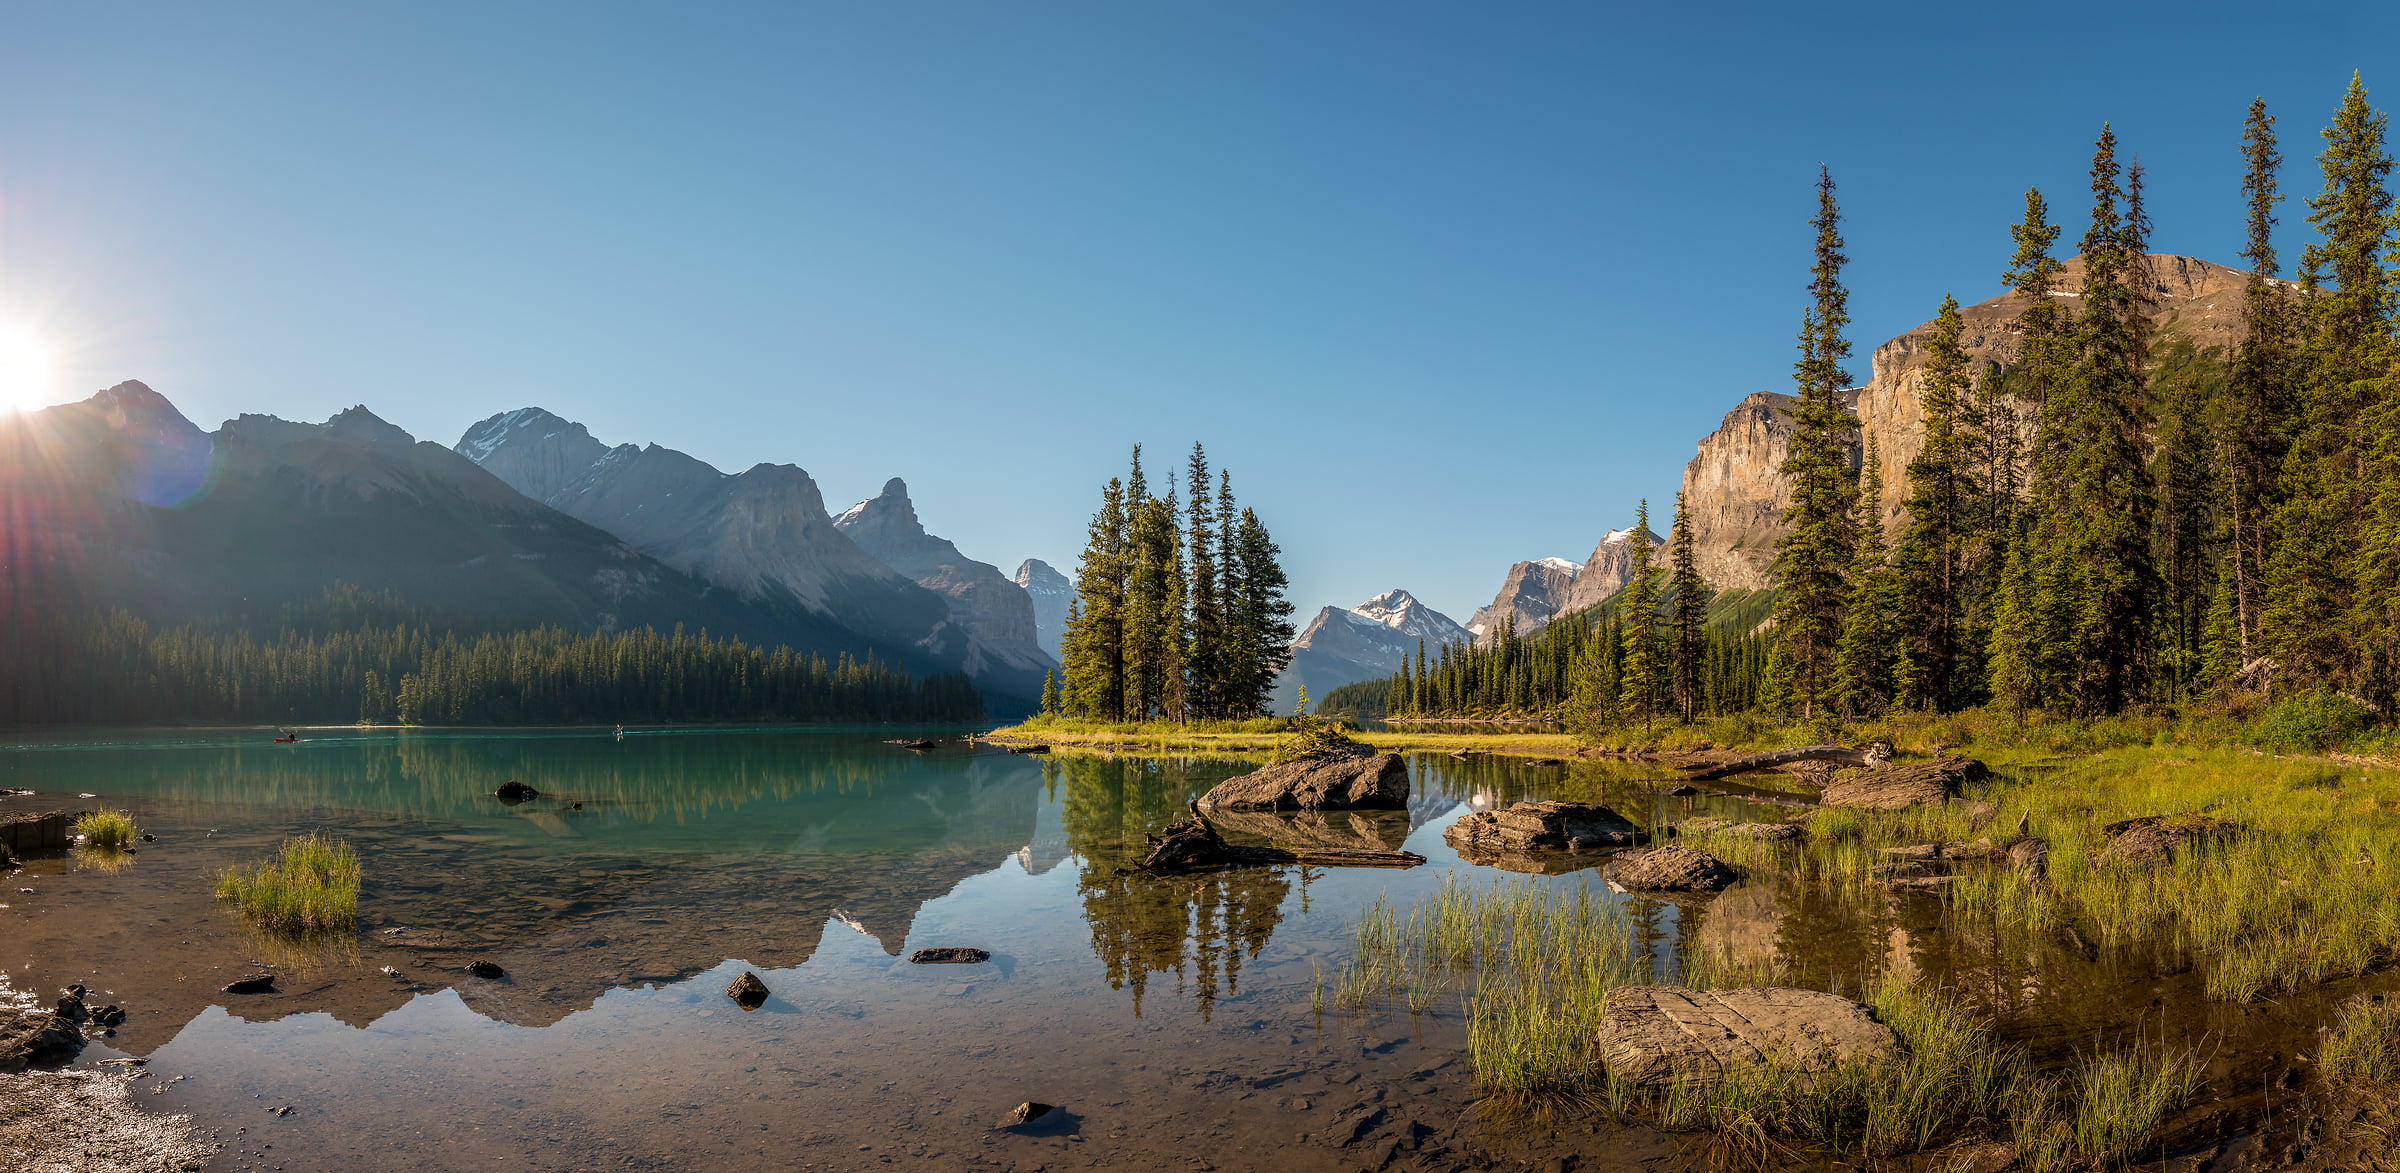 170 megapixels! A very high resolution, large-format VAST photo print of Maligne Lake, Jasper National Park, Canada; nature landscape photo created by Tim Shields